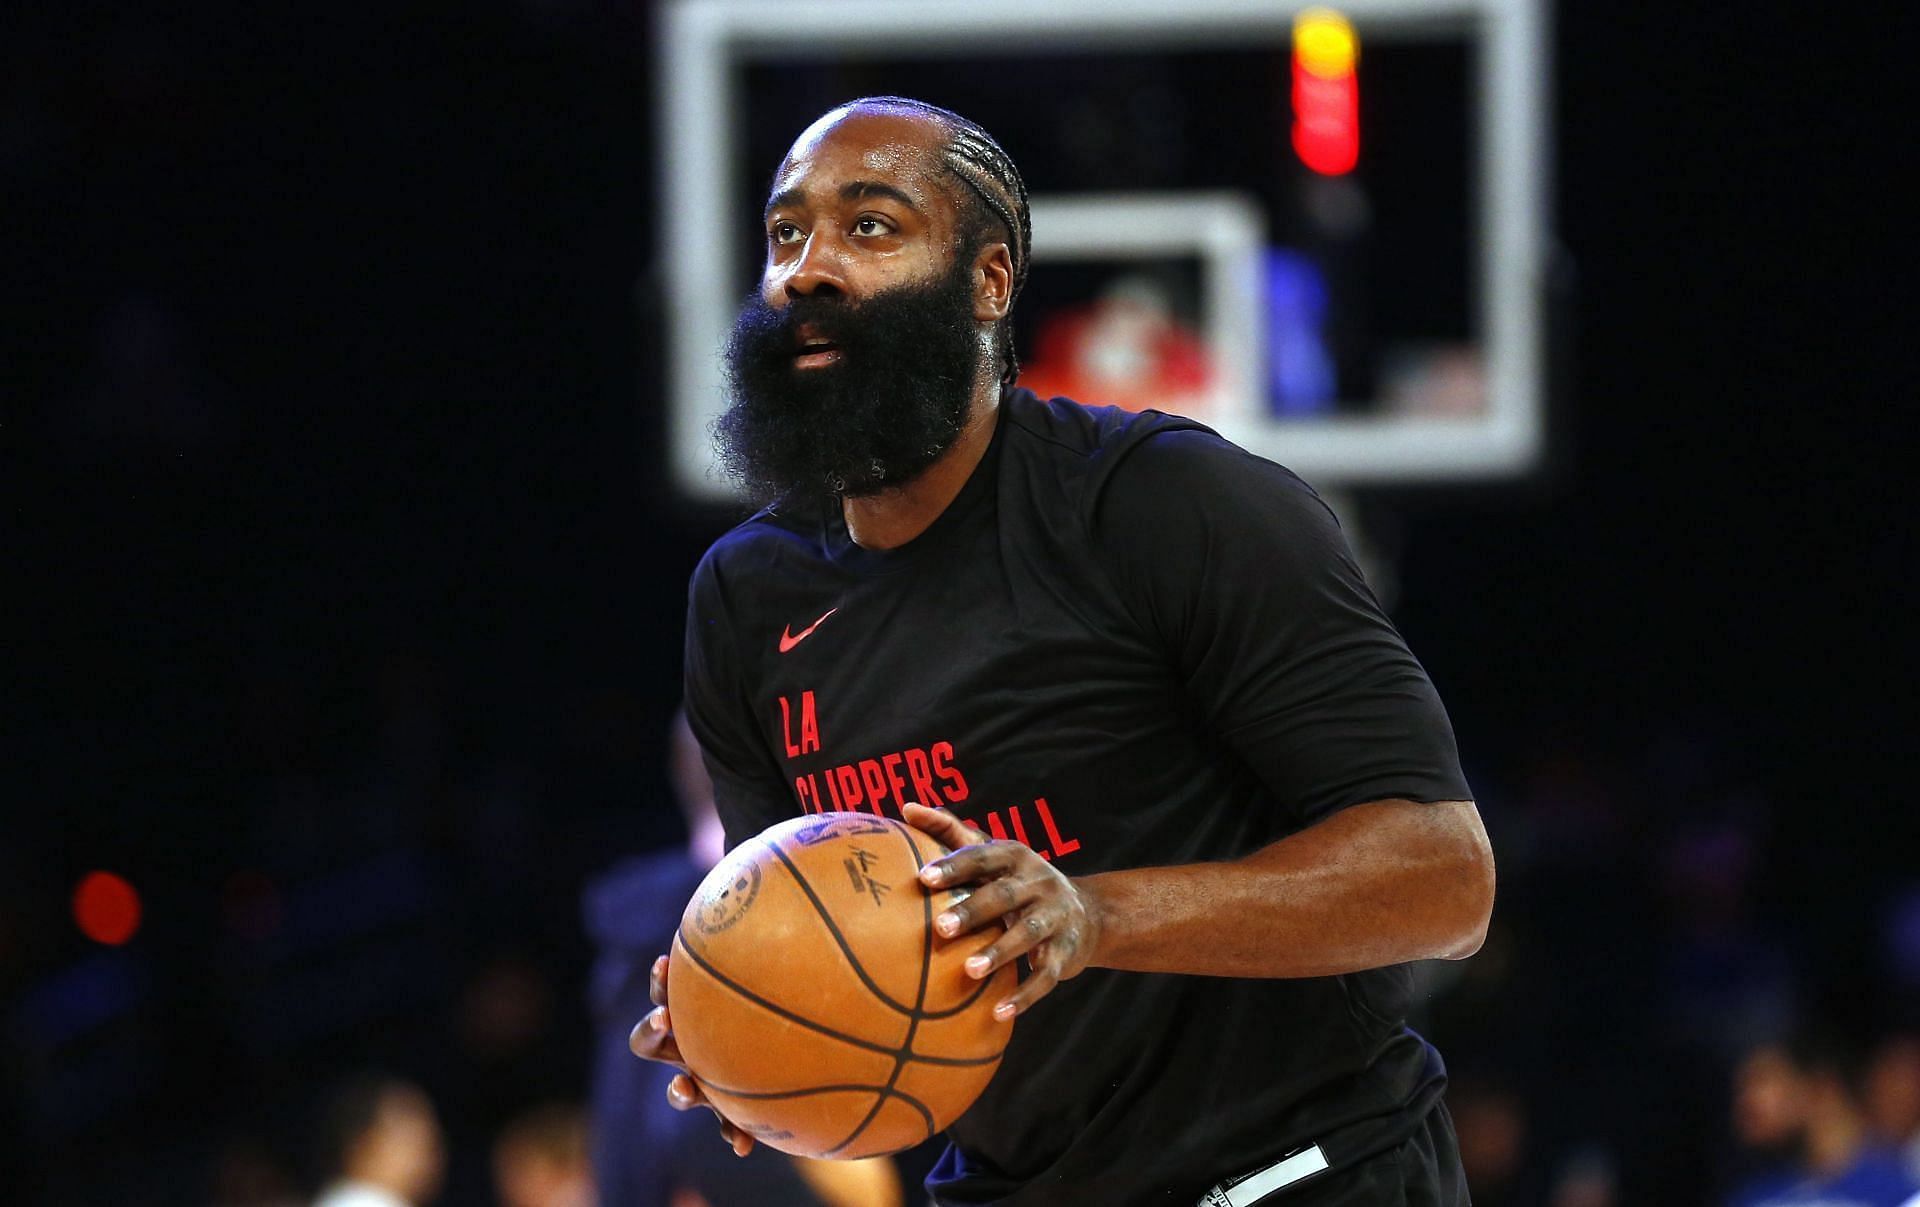 James Harden takes to social media ahead of rematch with Spurs on Wednesday.